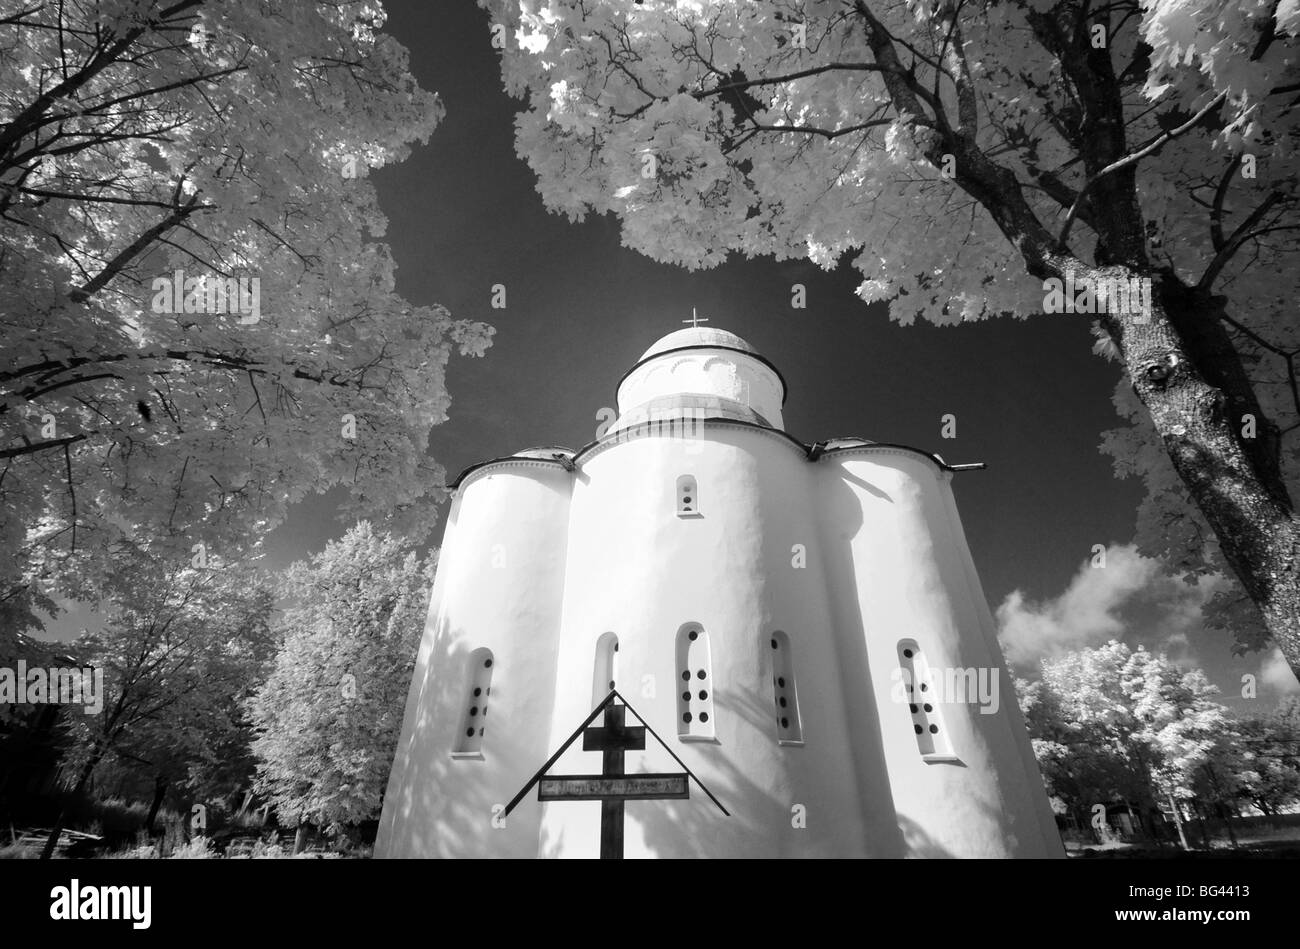 Infrared image of the Church of the Assumption of Our Lady, Uspensky Convent, Staraya Ladoga, Leningrad region, Russia Stock Photo